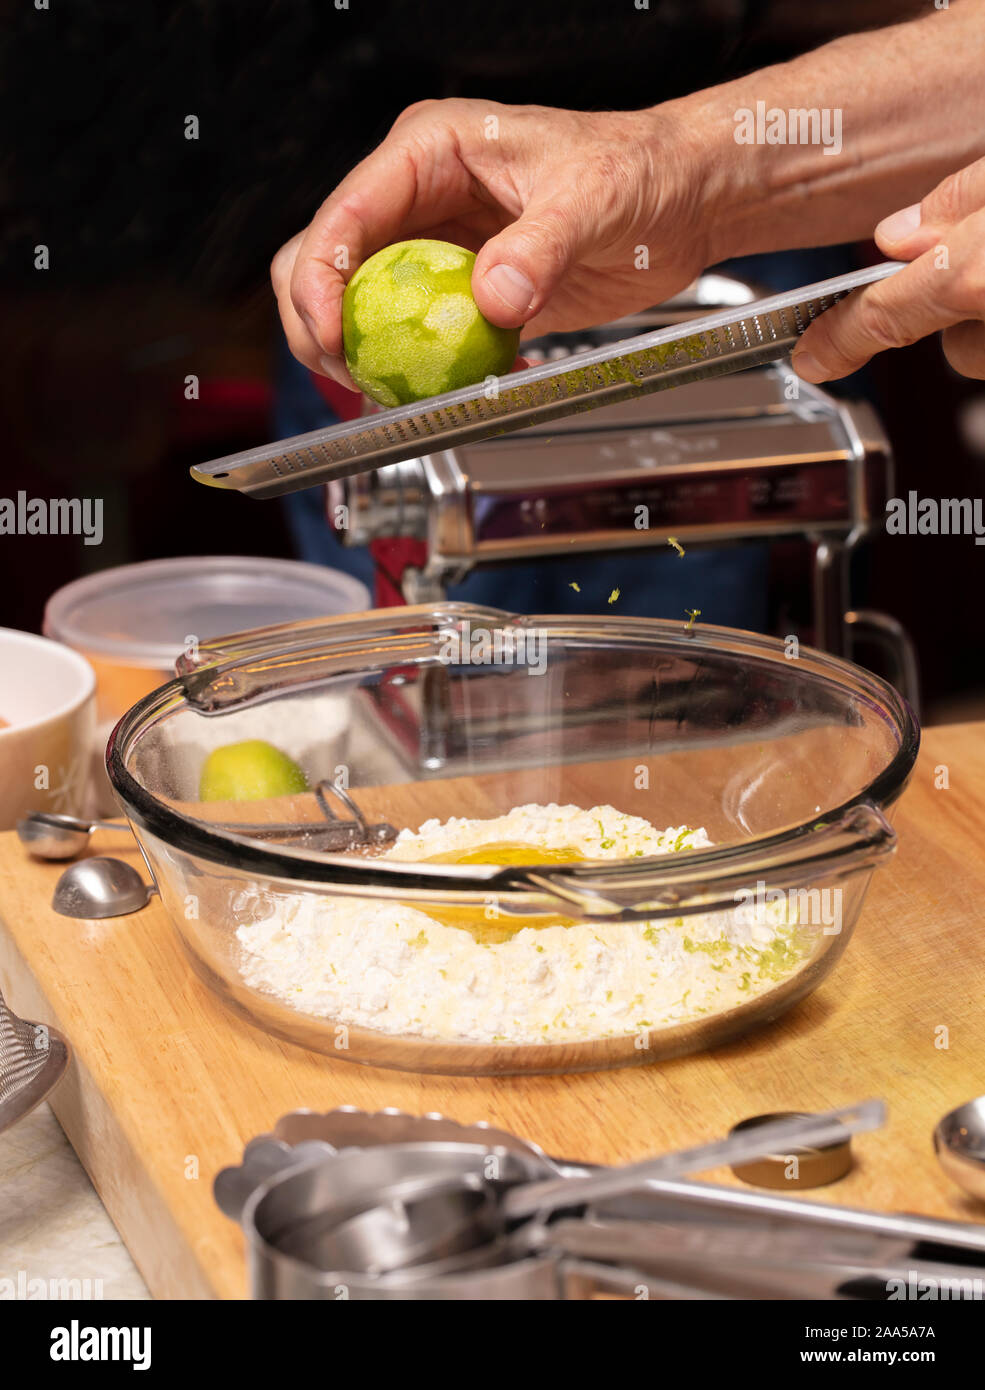 Citrus flavored pasta dough being prepared during a pasta class Stock Photo